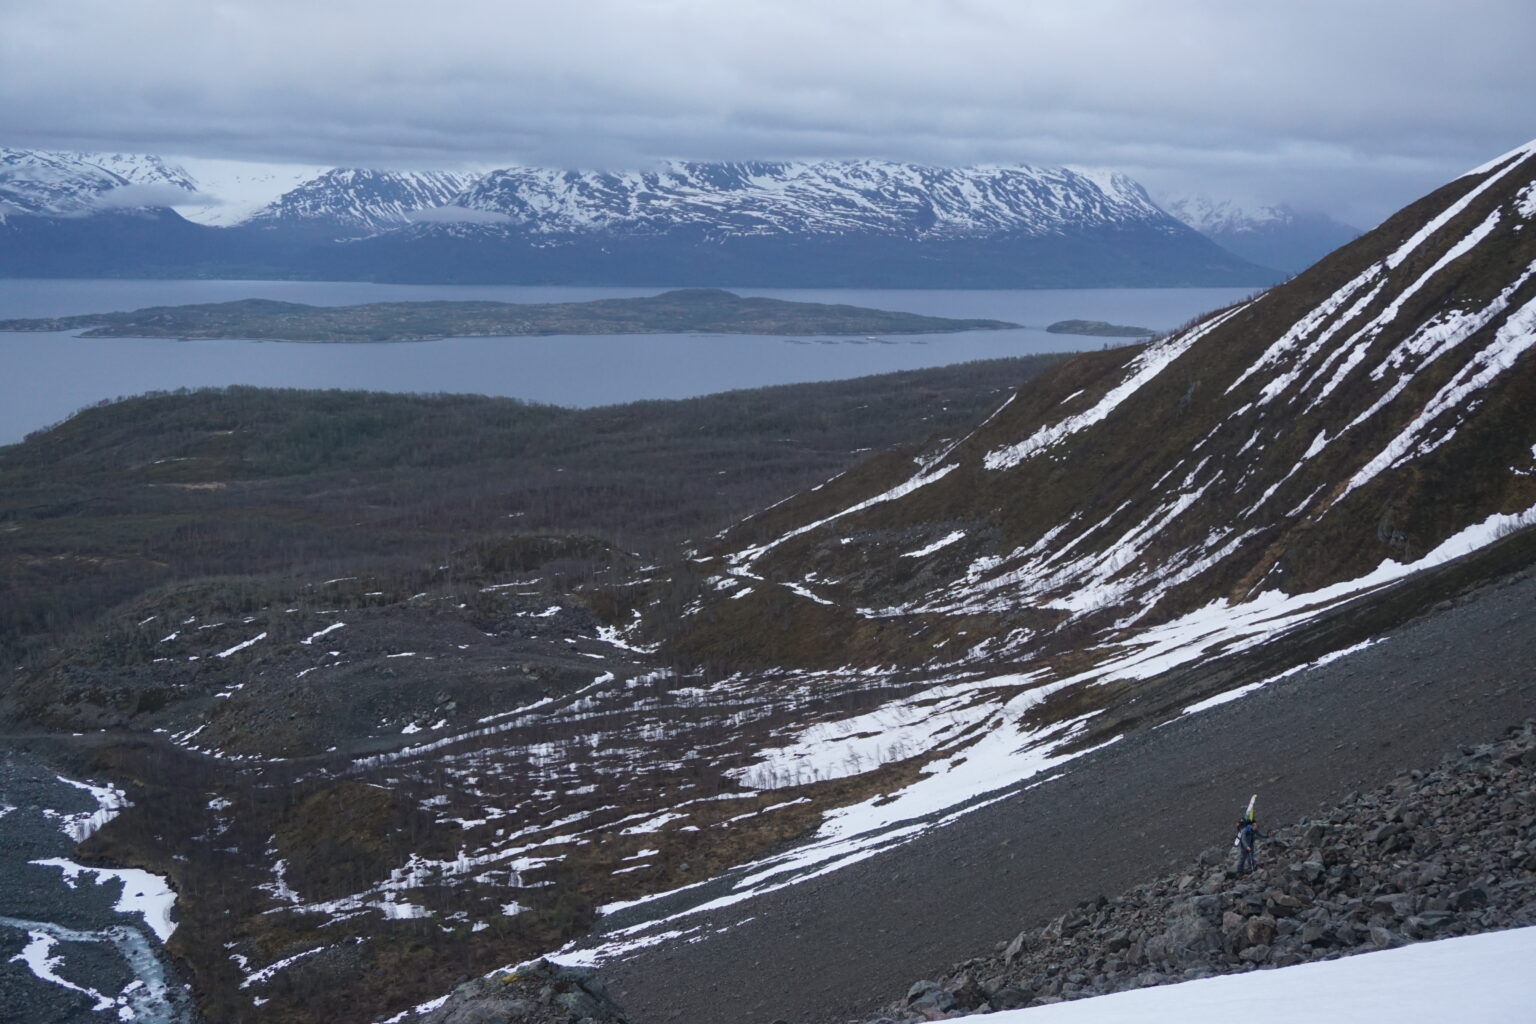 Hiking up a scree field with Lyngen fjord in the distance